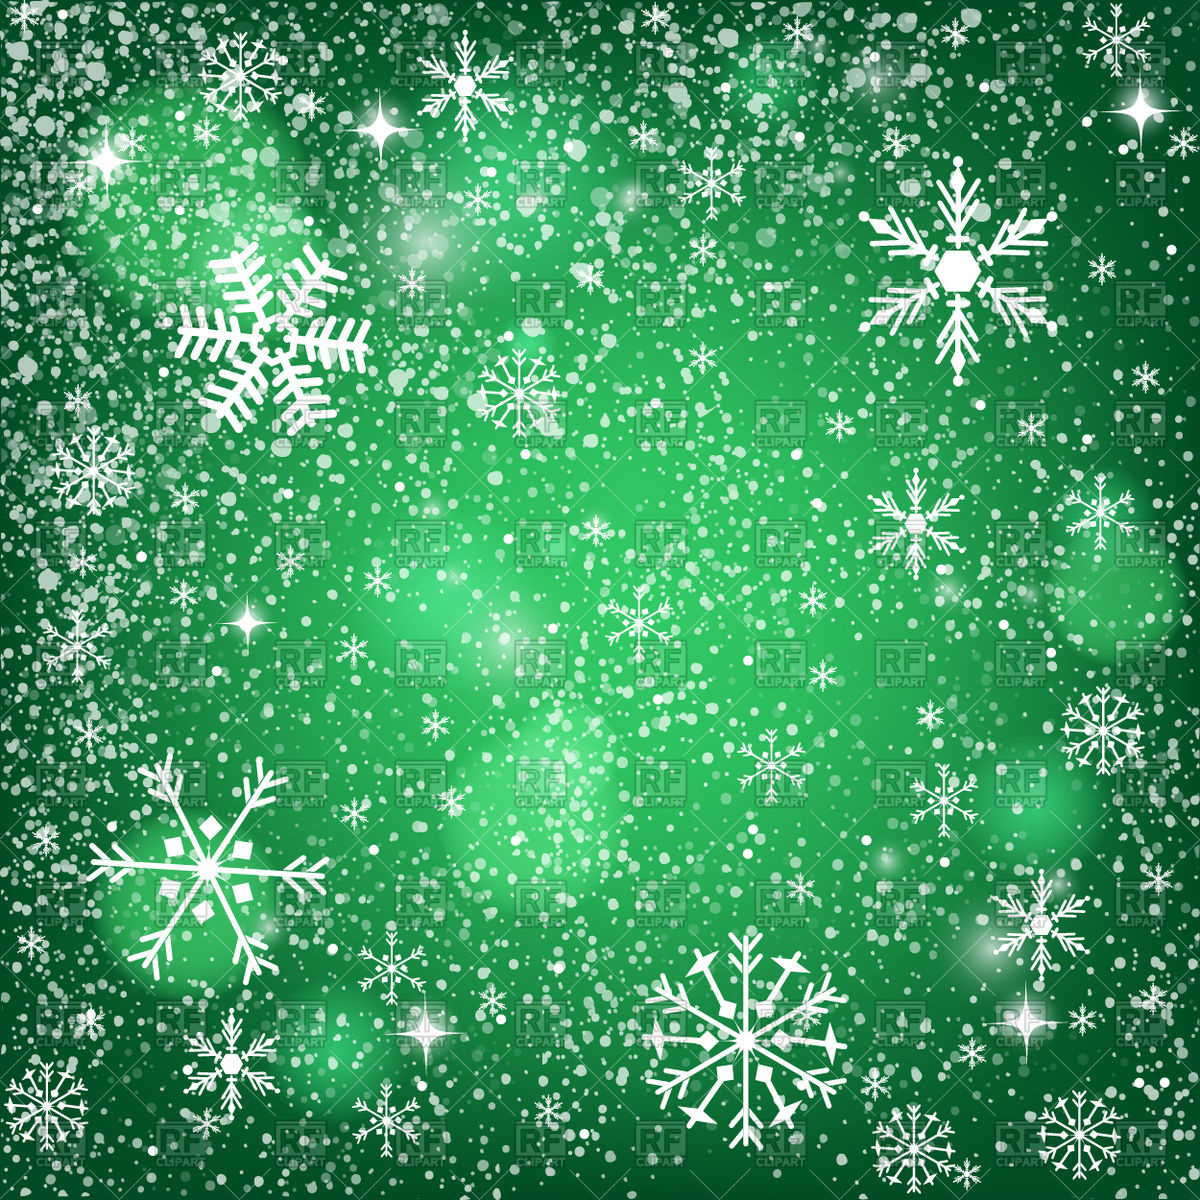 Abstract Green Christmas Background Snowy Pattern With Snowflakes